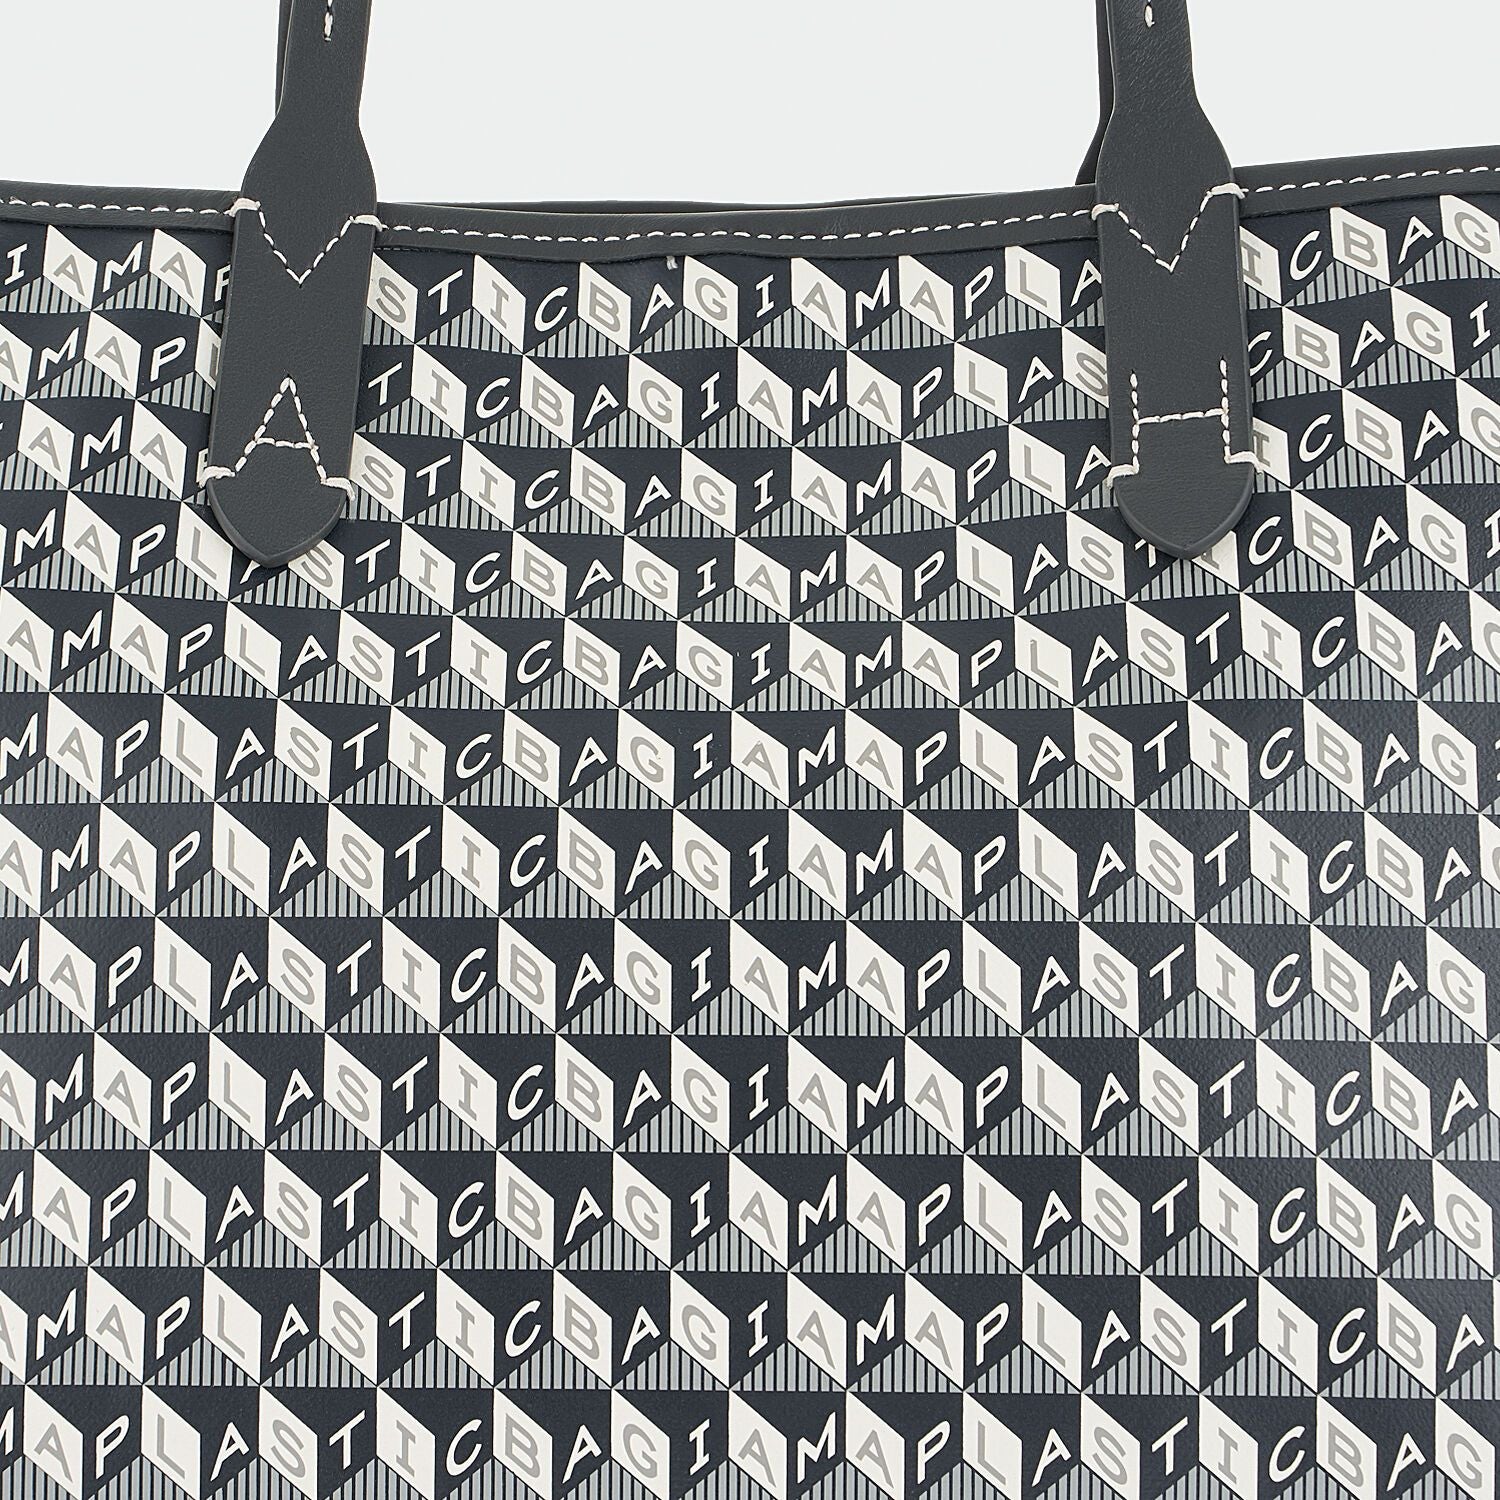 I Am A Plastic Bag Small Tote -

                  
                    Recycled Coated Canvas in Charcoal -
                  

                  Anya Hindmarch EU
